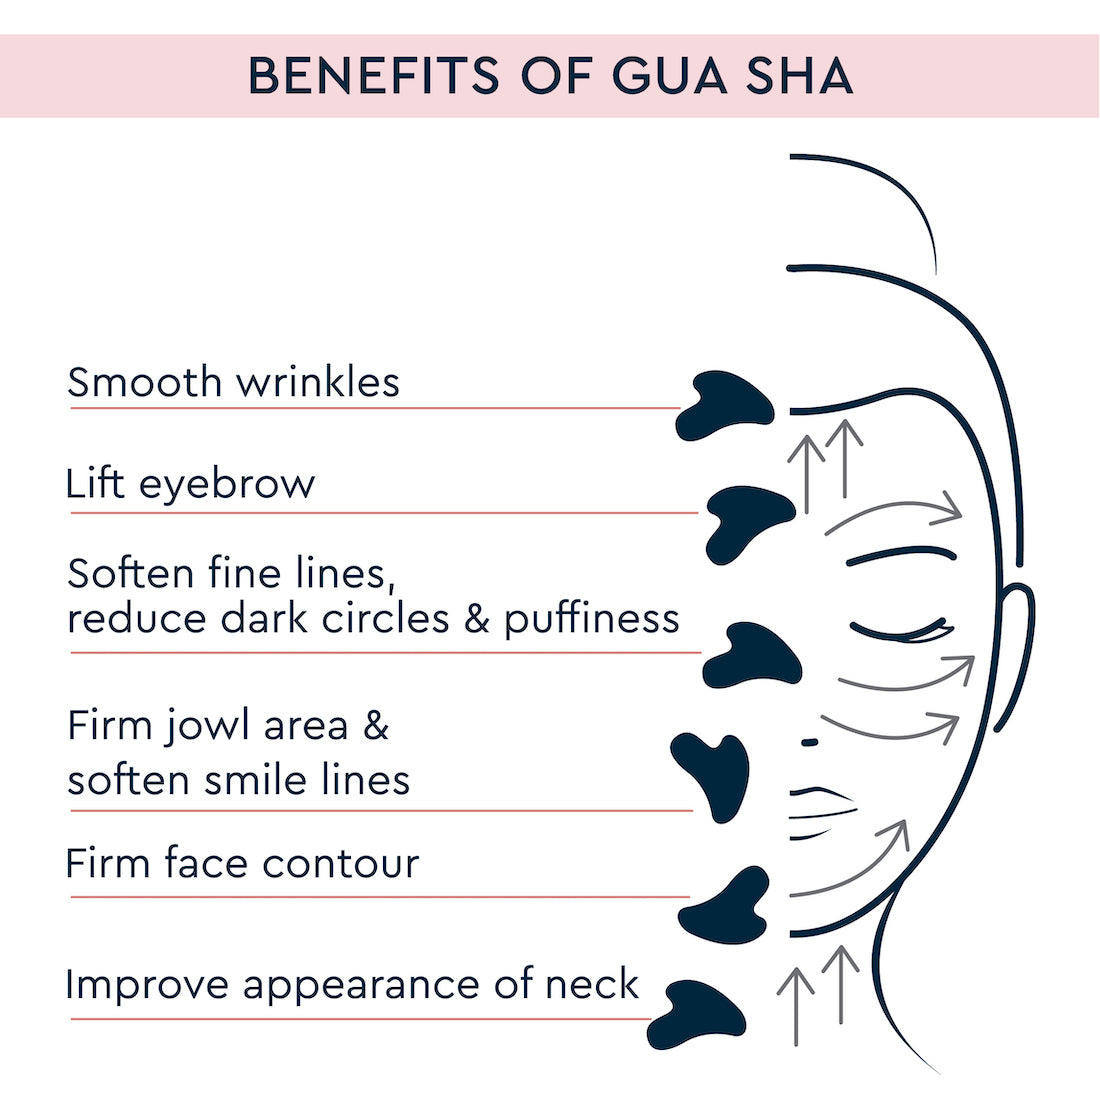 benefit of using Gua sha in daily routine 